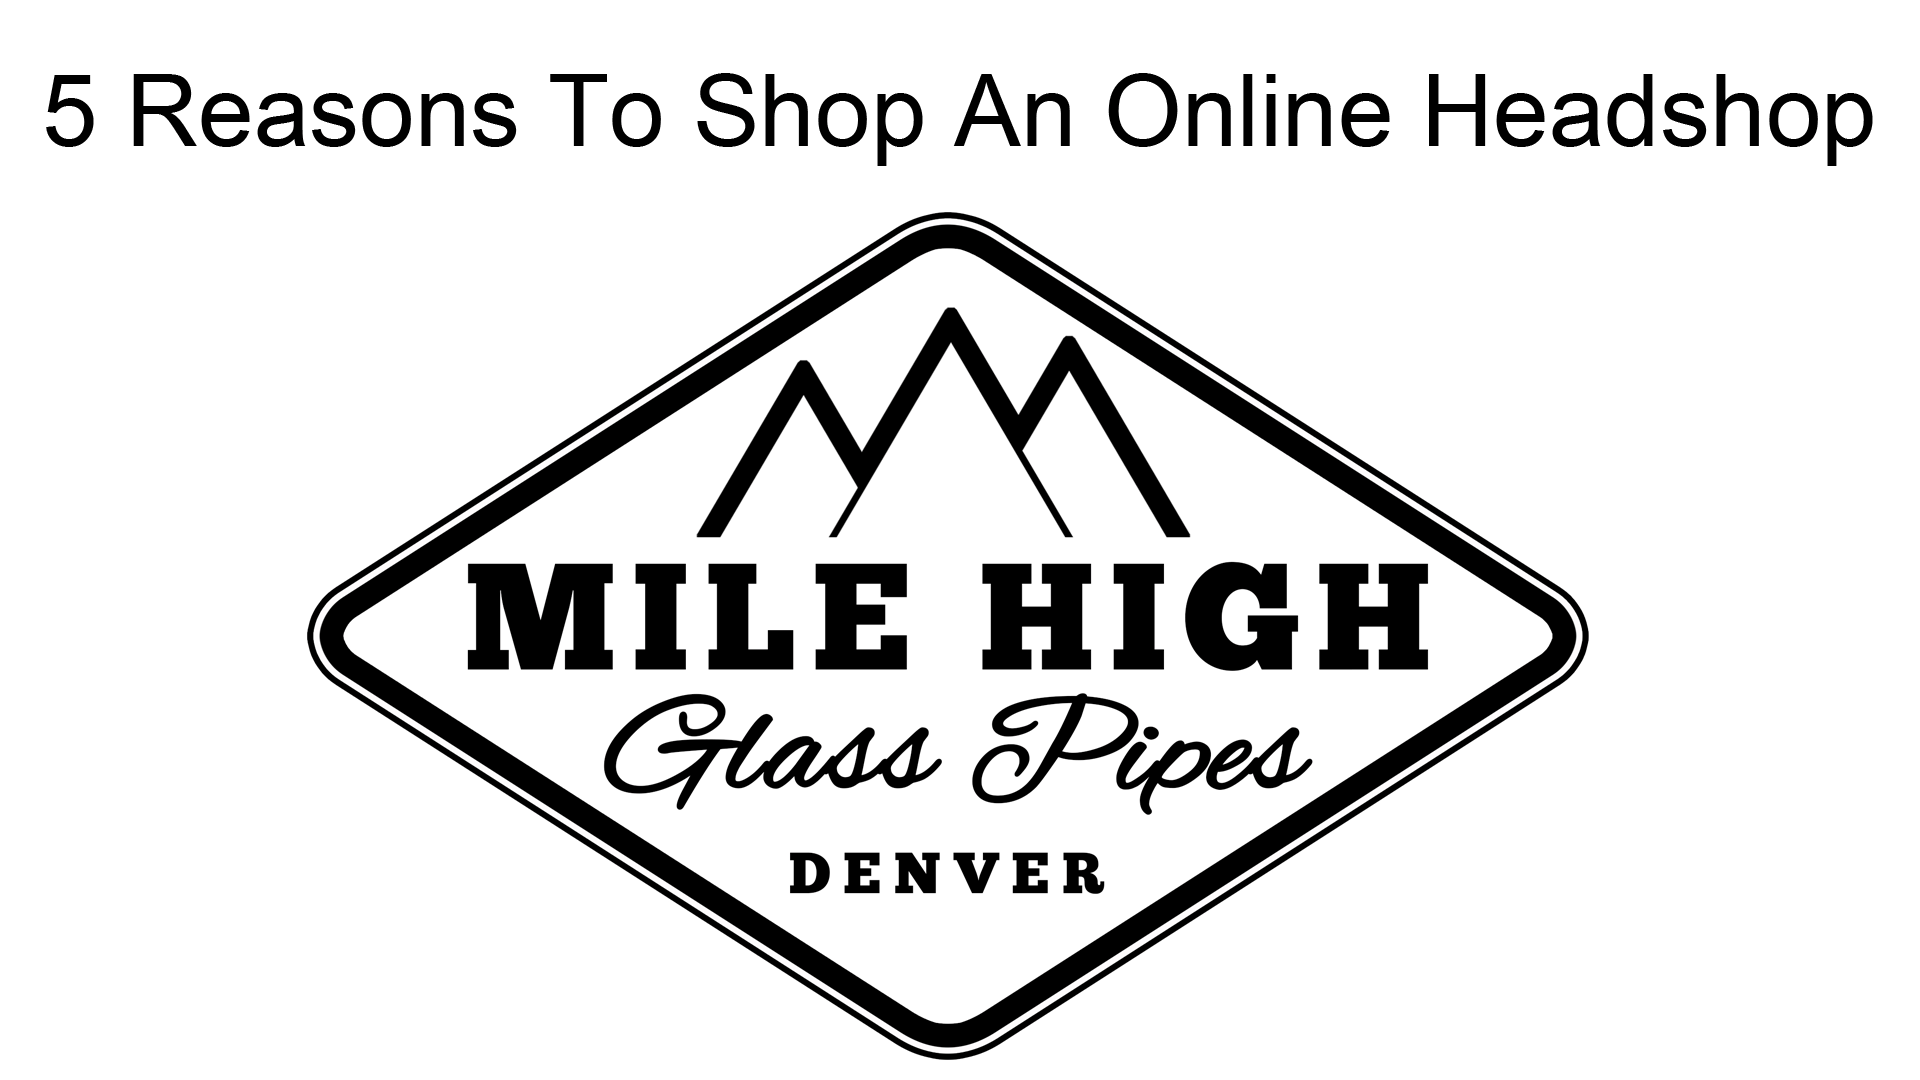 5 Reasons To Shop An Online Headshop